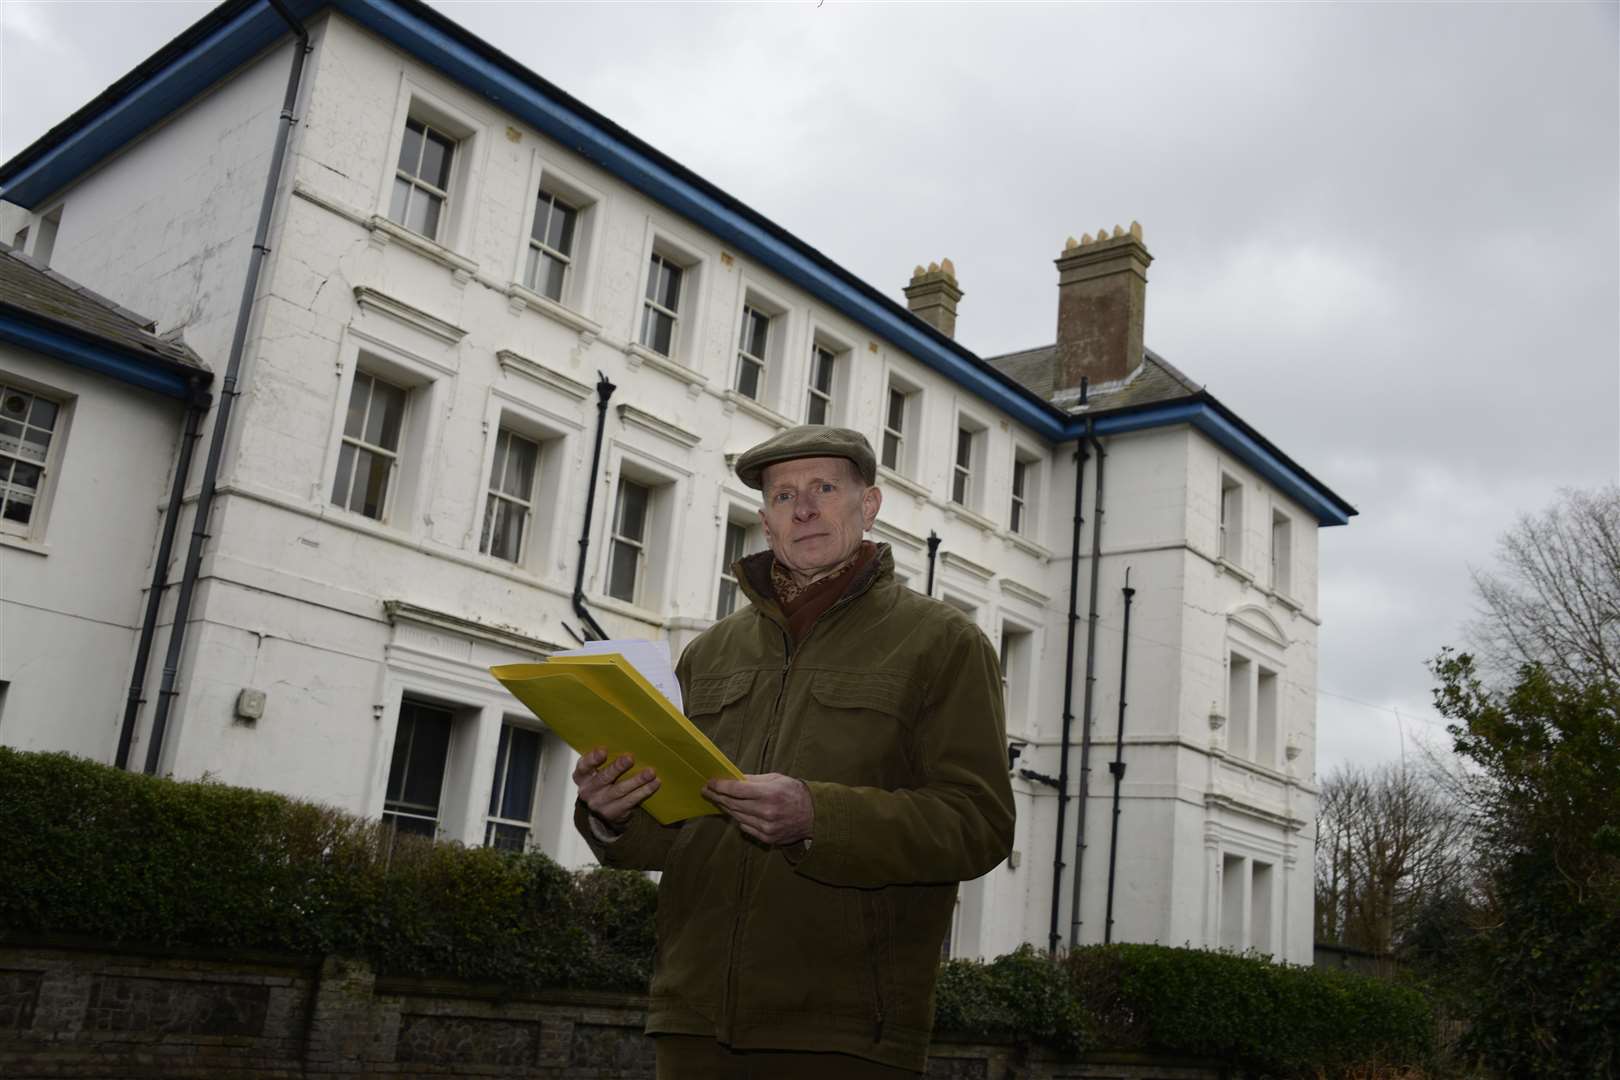 Bill Ratchford has concerns about proposals to demolish the Victorian building